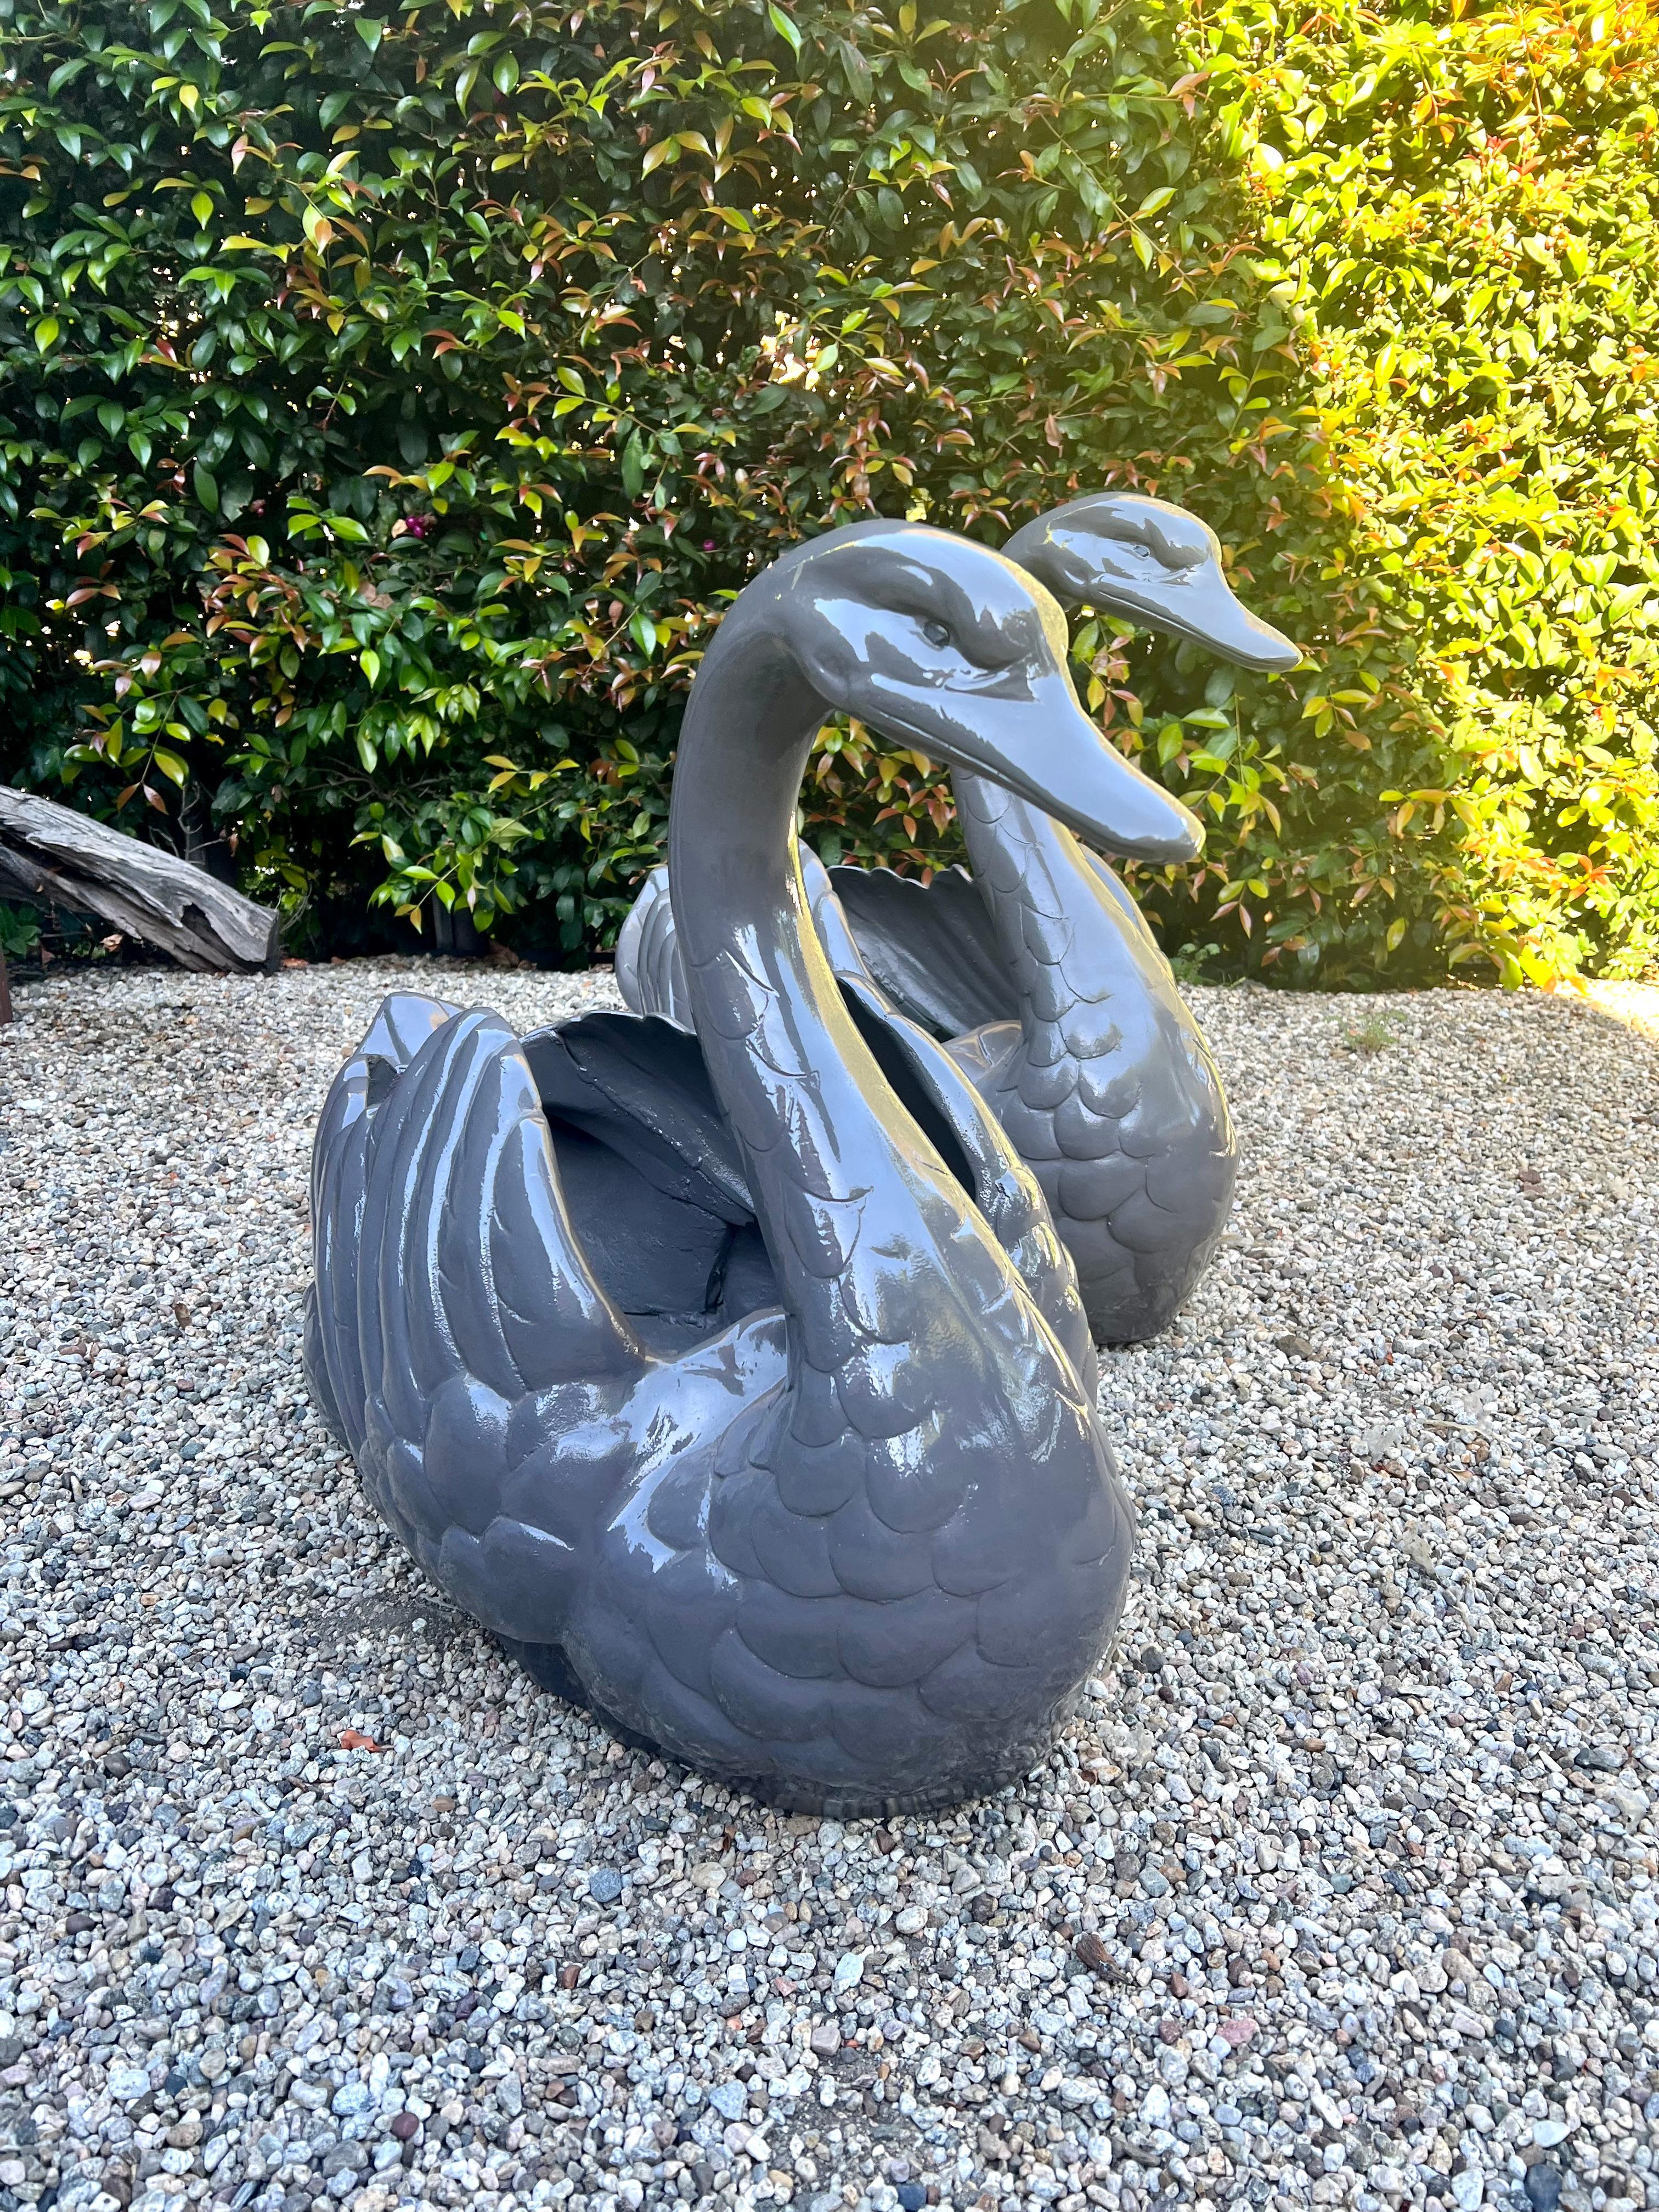 Pair of oversized Garden Planters or Jardinieres in the shape of a swan. Details of the face and feathers are both well done and graceful.

The pair make a lovely addition to any garden or patio setting - they can add to a very sophisticated space